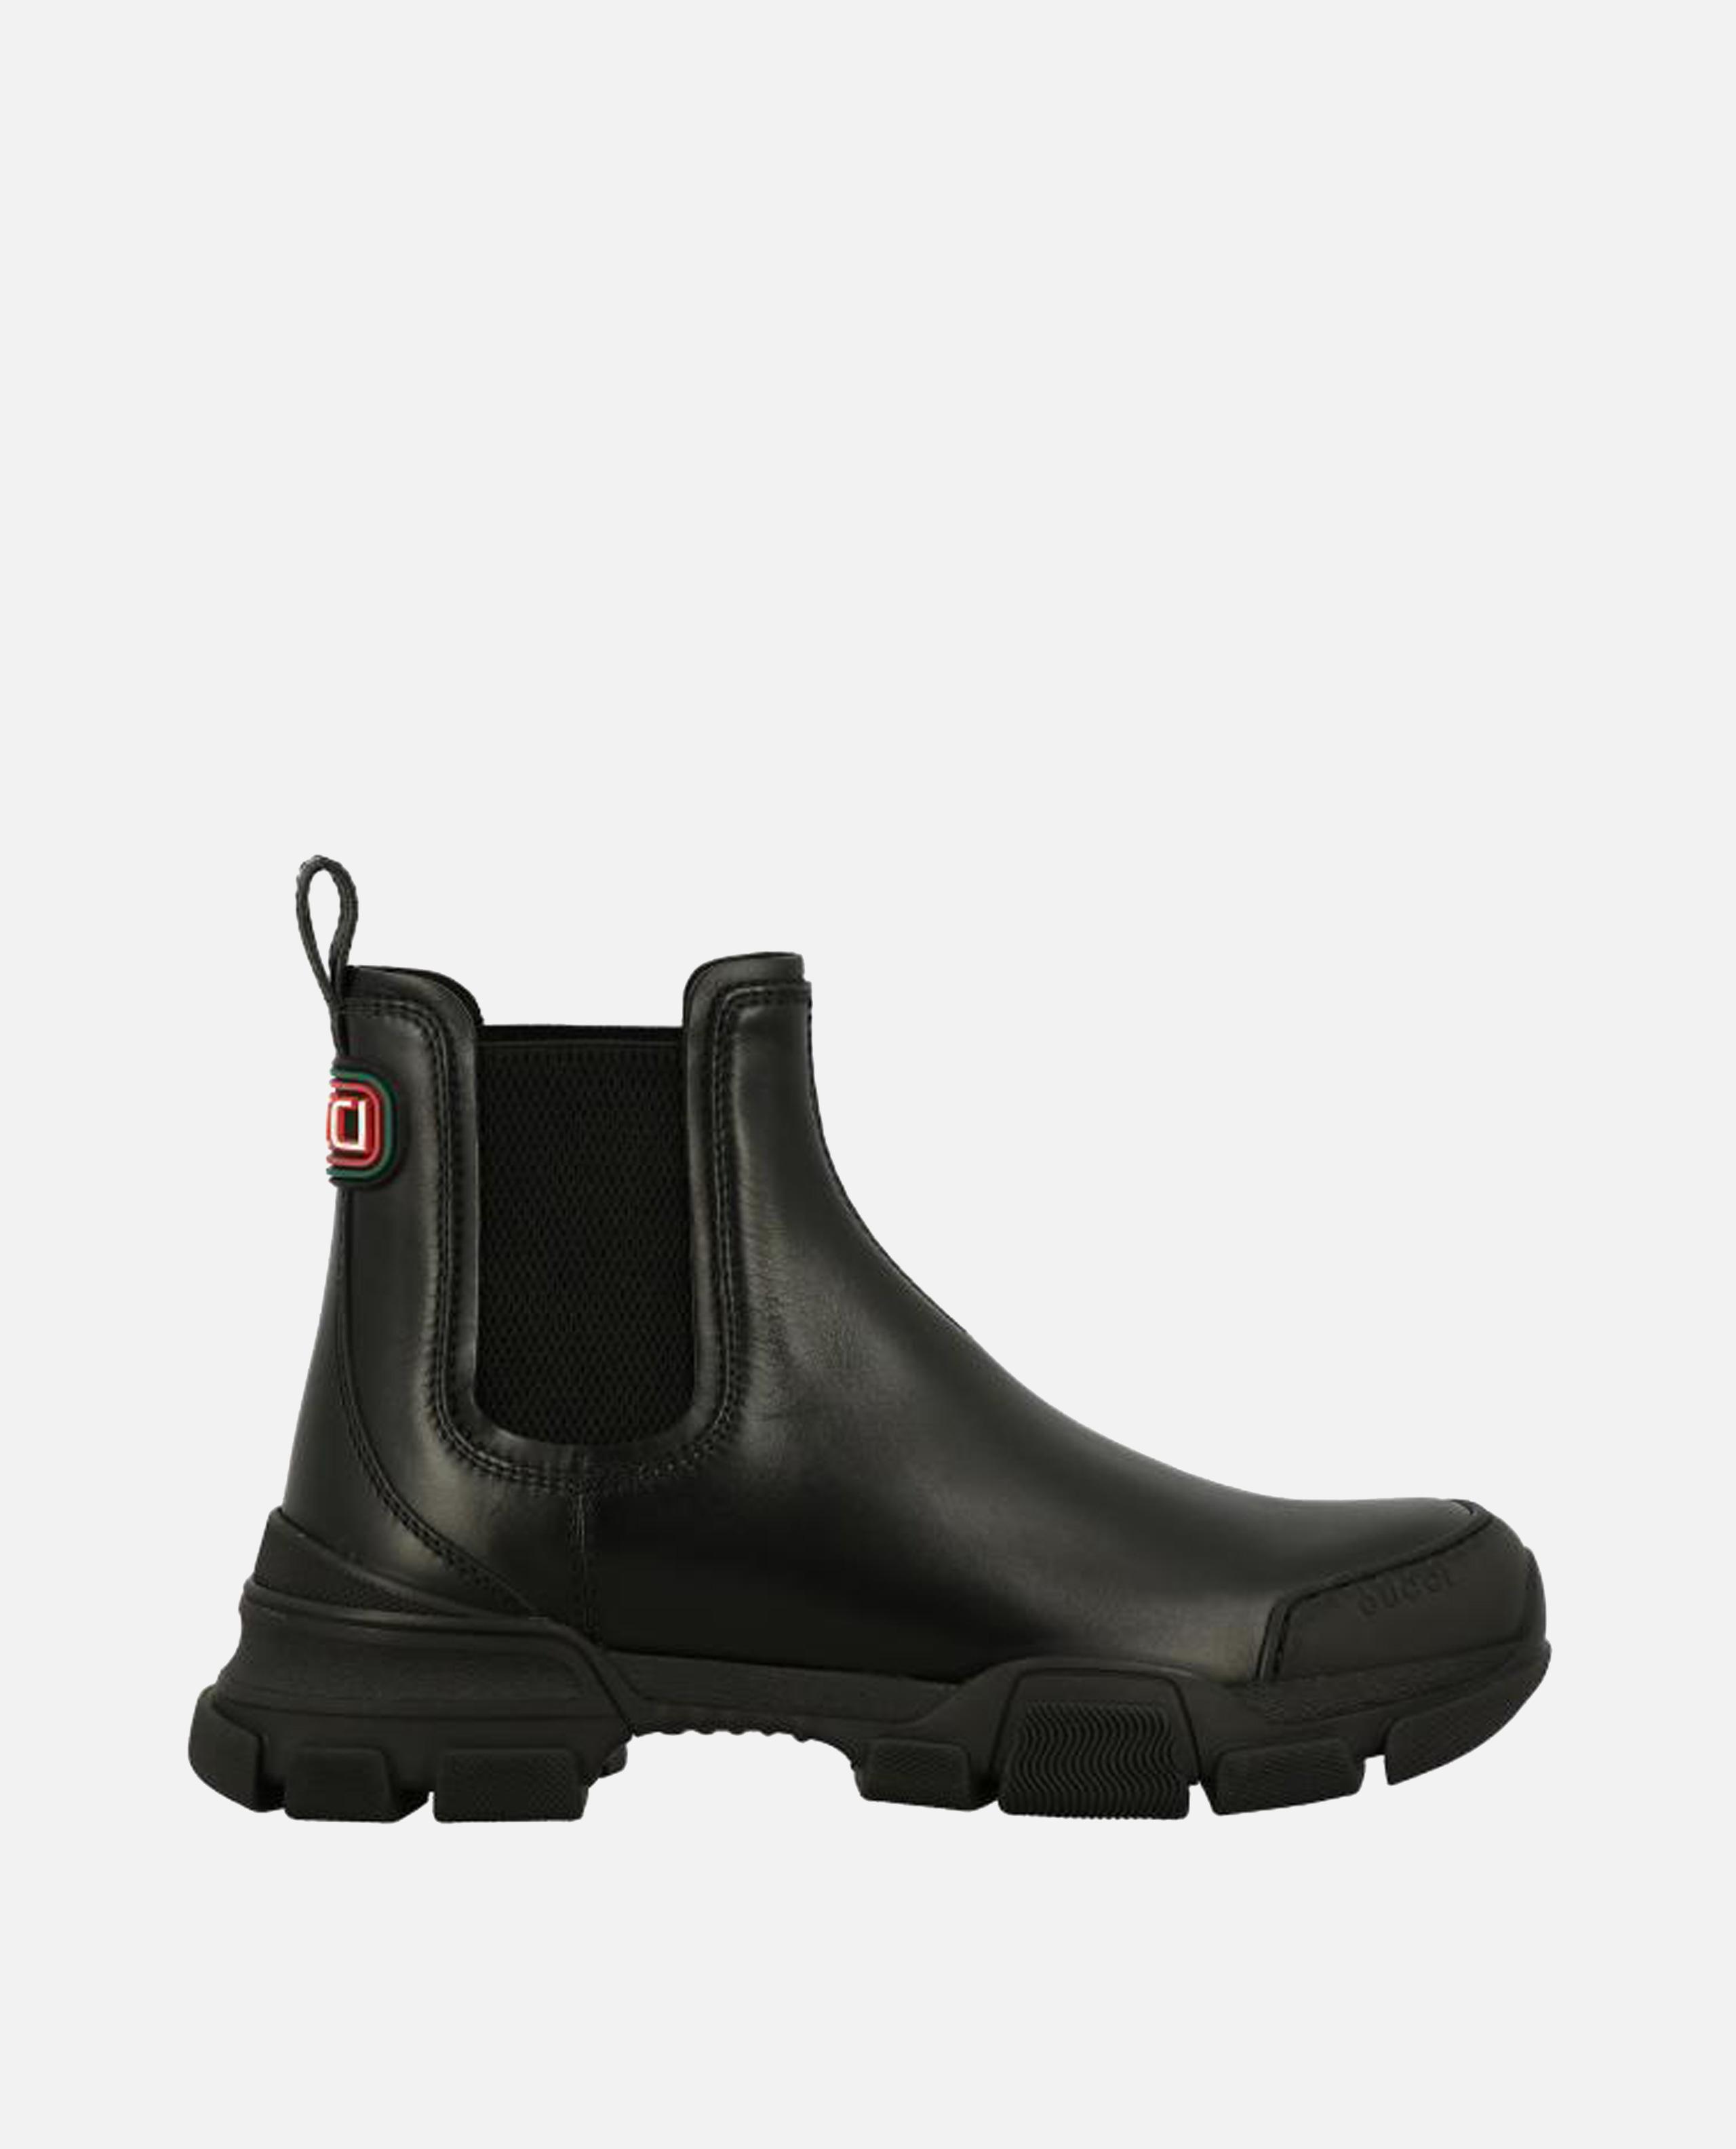 Gucci Leather Chelsea Boot in Black for Men - Lyst